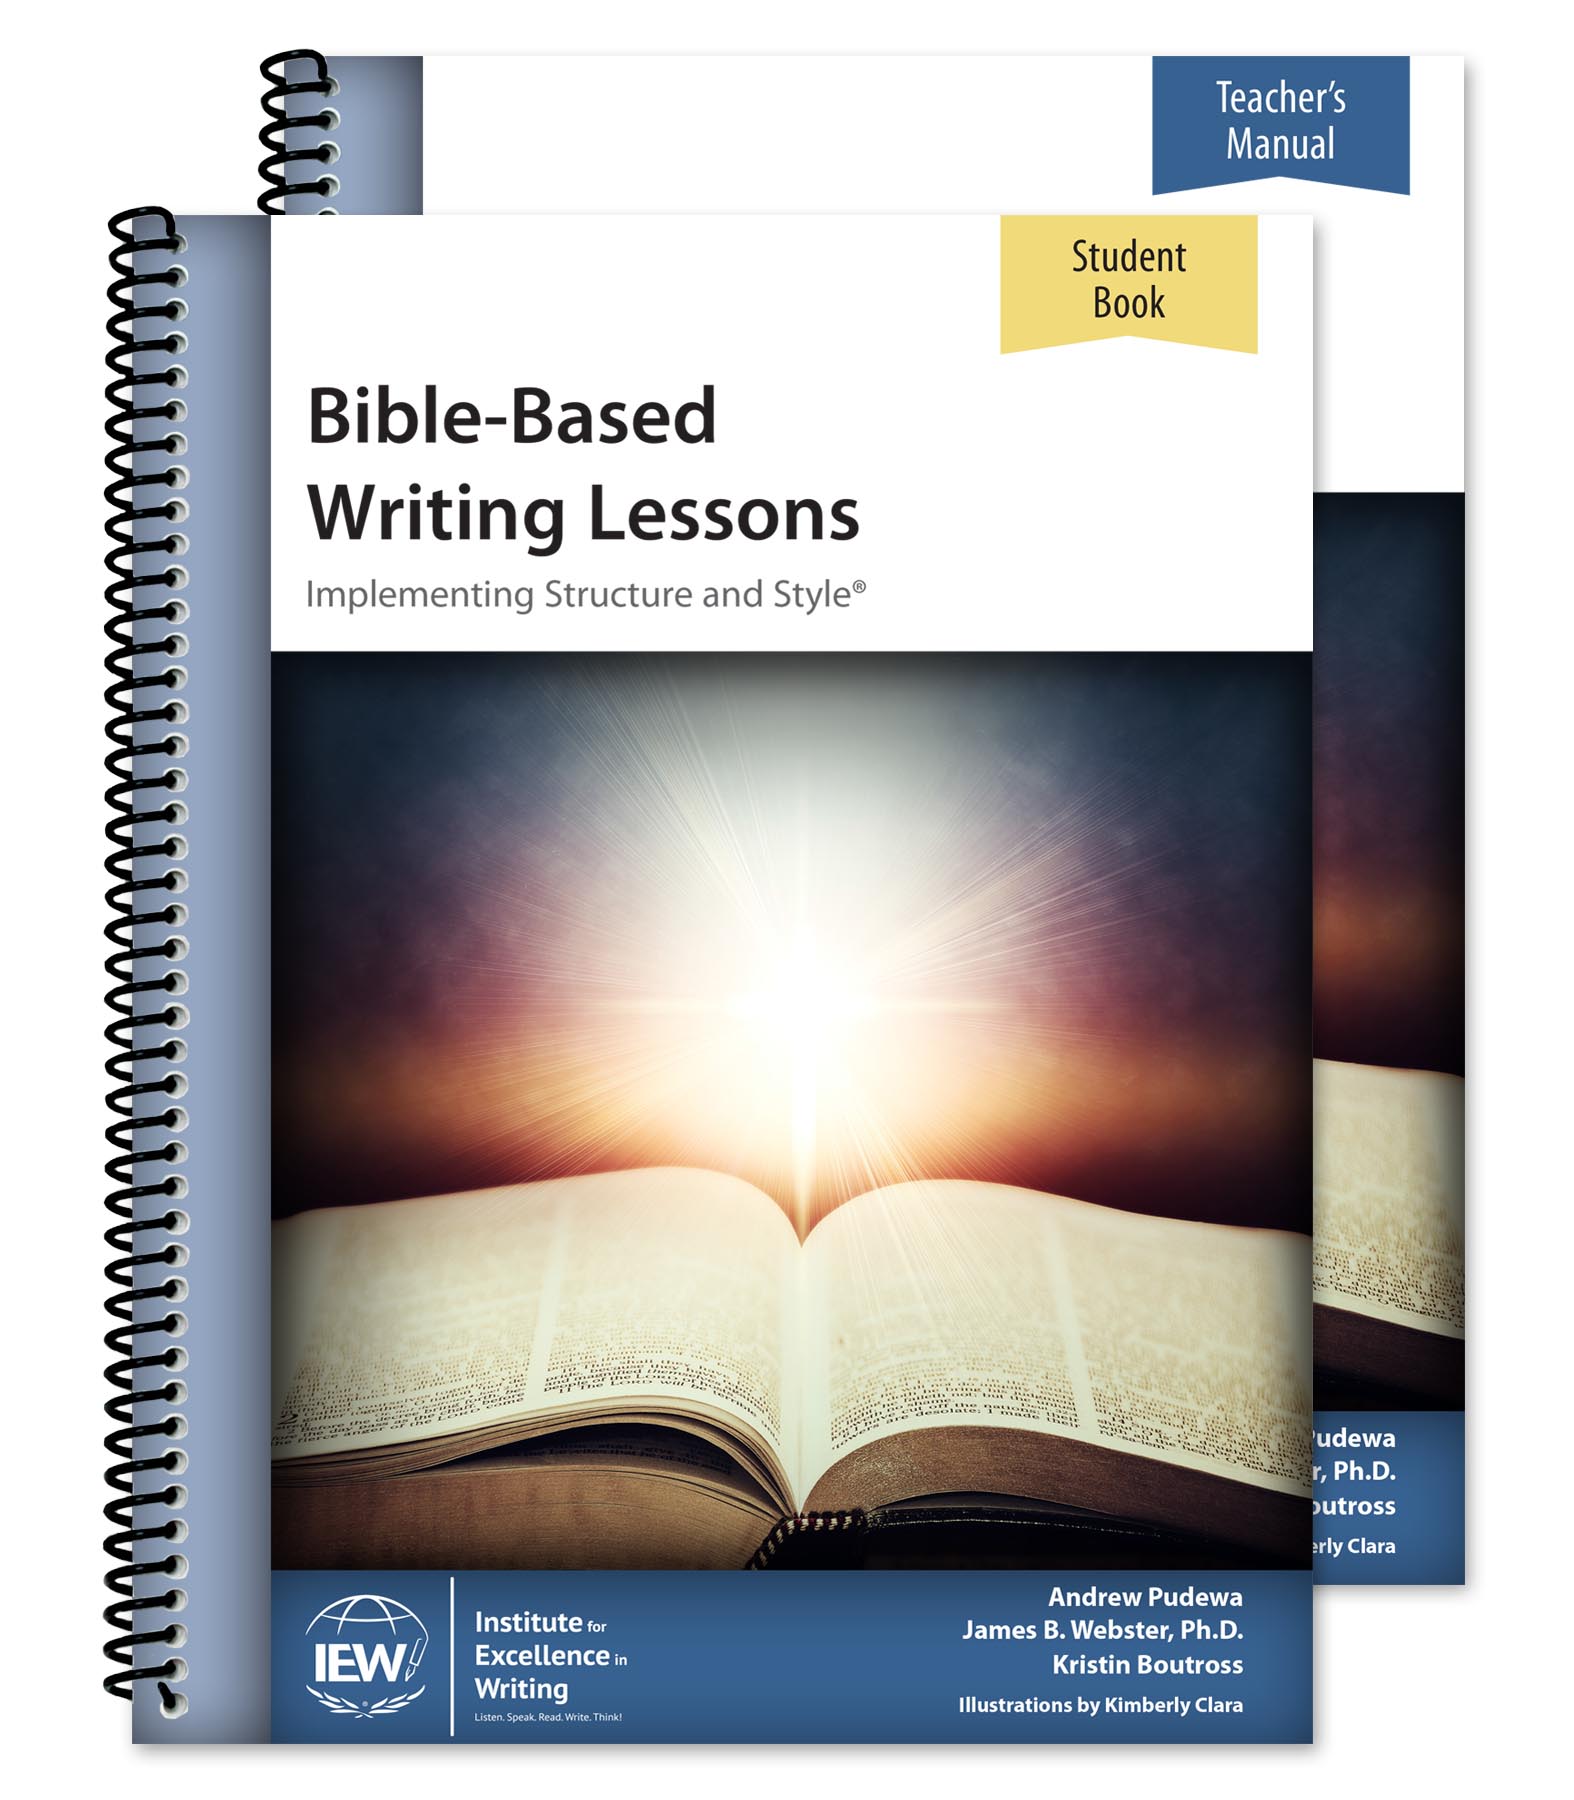 Bible-Based Writing Lessons [Teacher/Student Combo] [CLEARANCE]